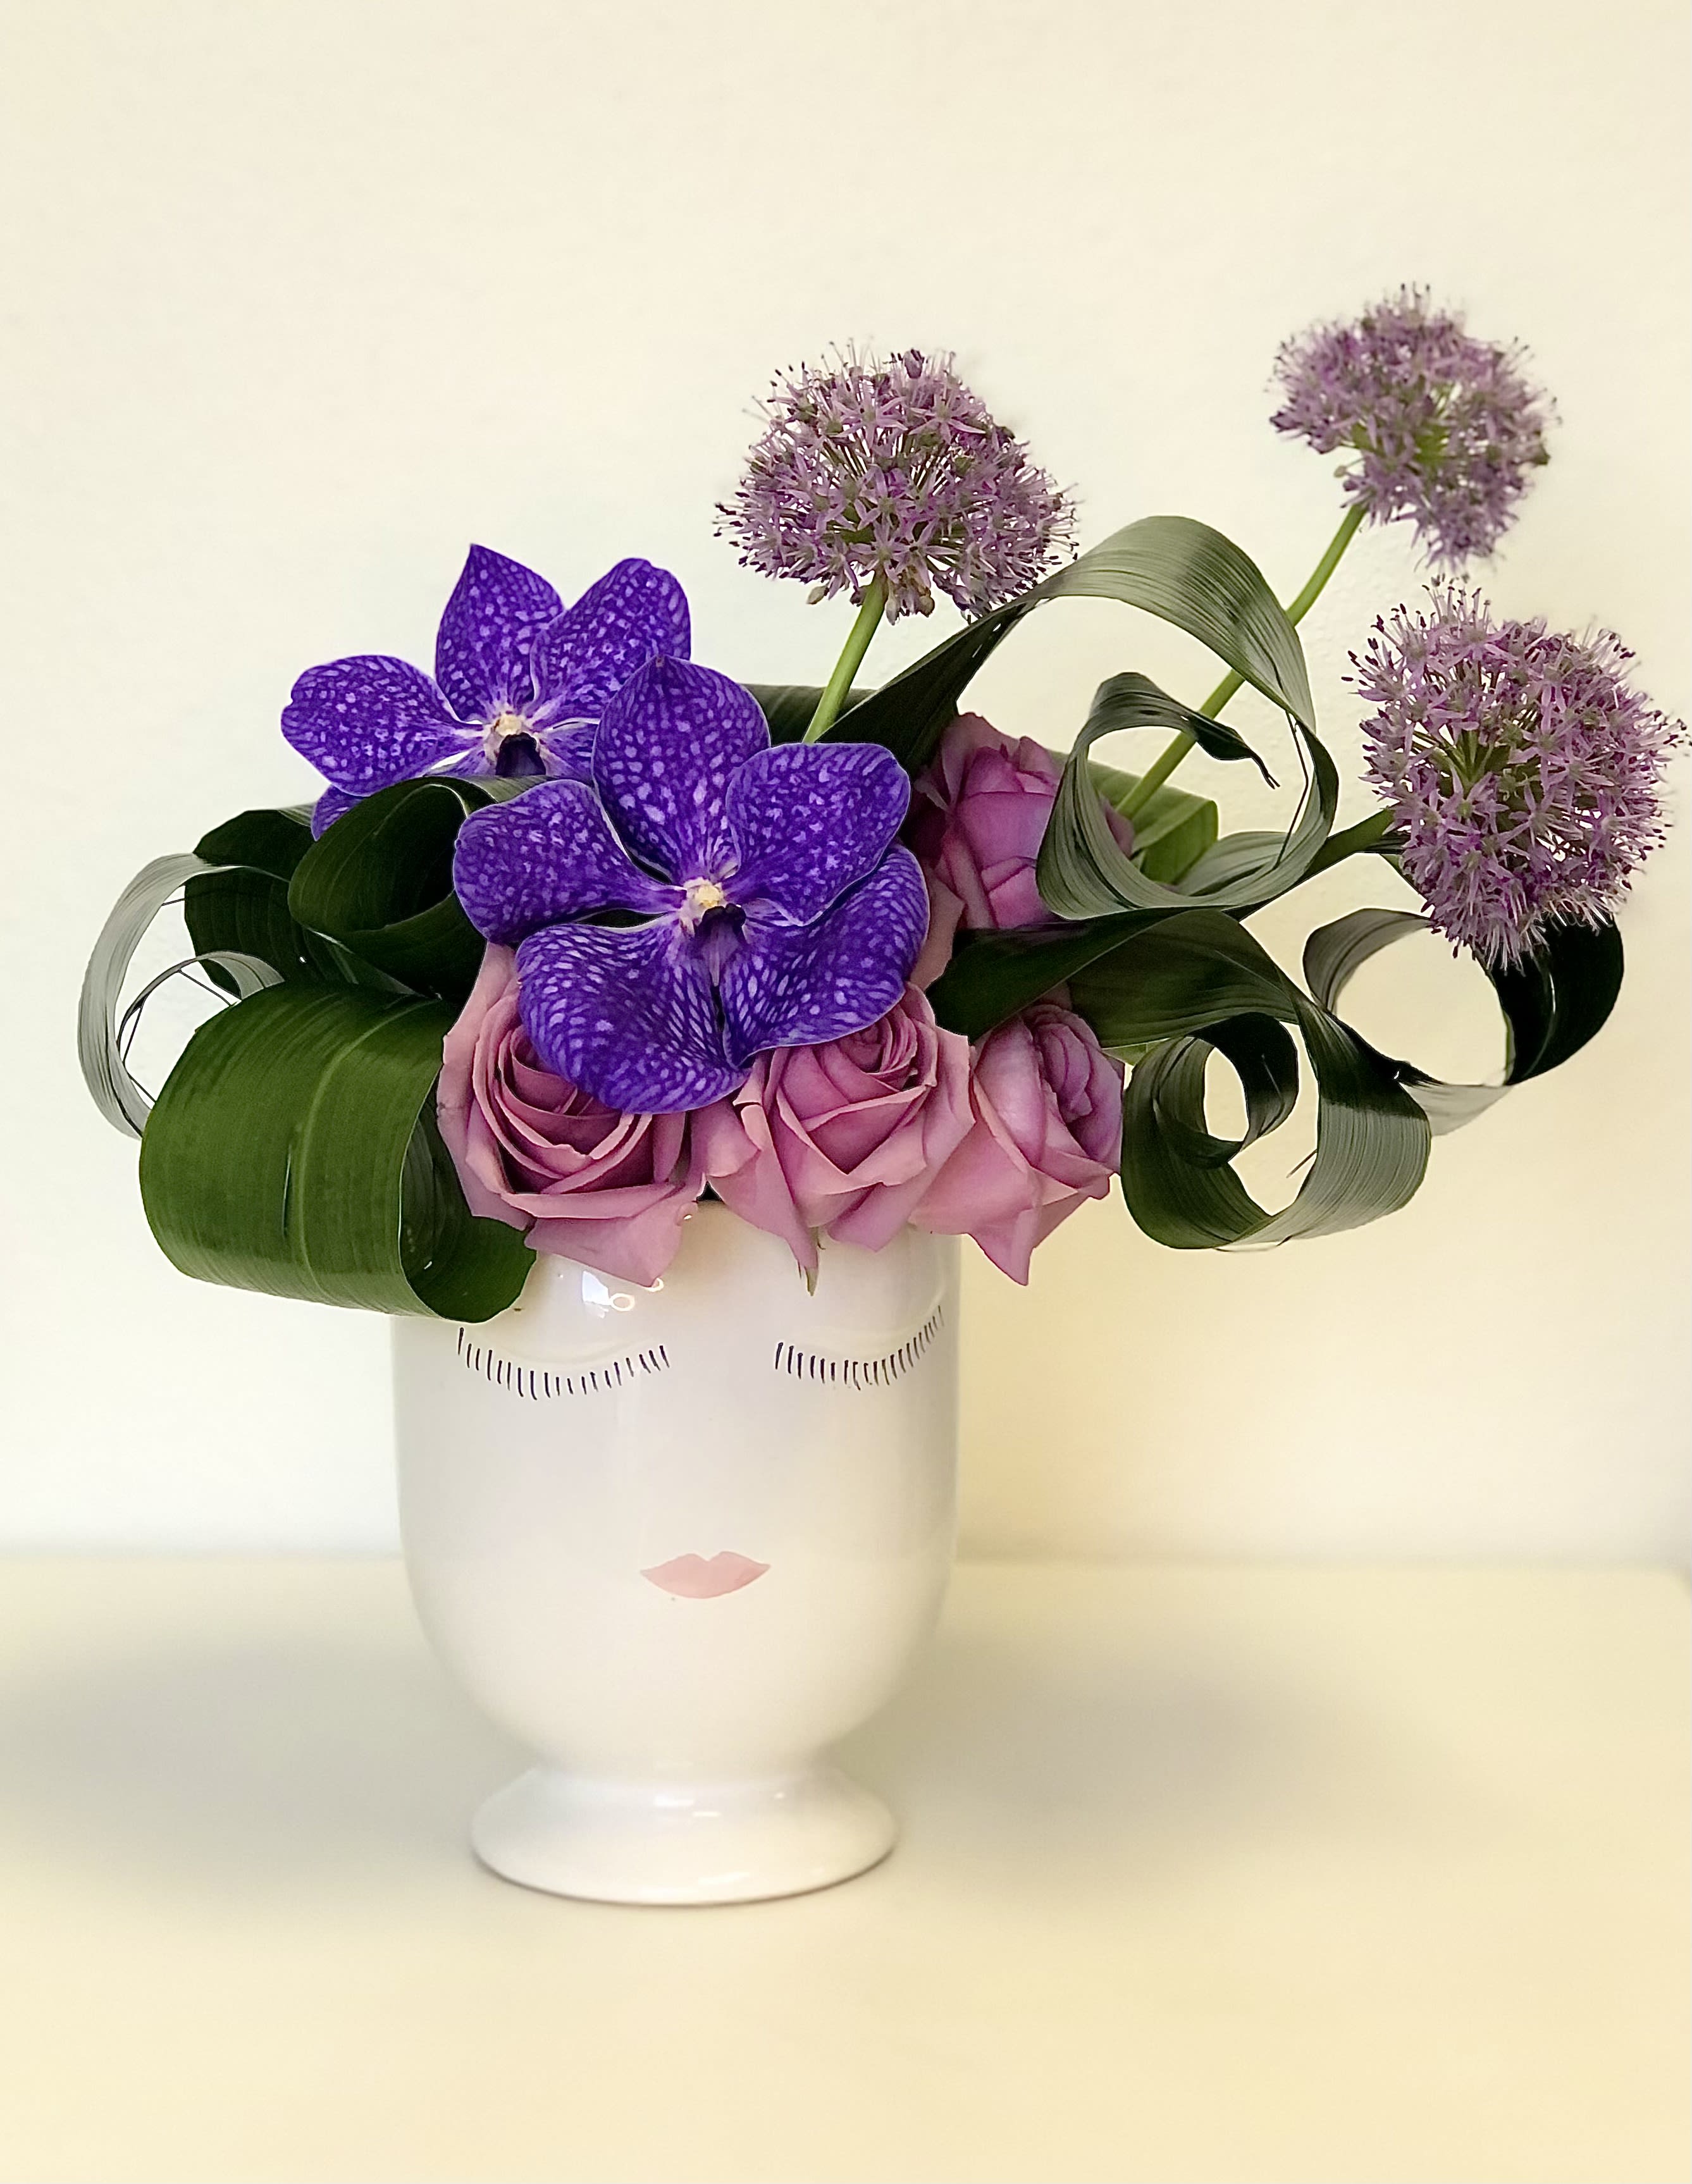 Halle - This manicured floral hairstyle is made with allium, spray roses, roses, and accented with purple vibrant vanda orchids – showcased in our selfie pot.